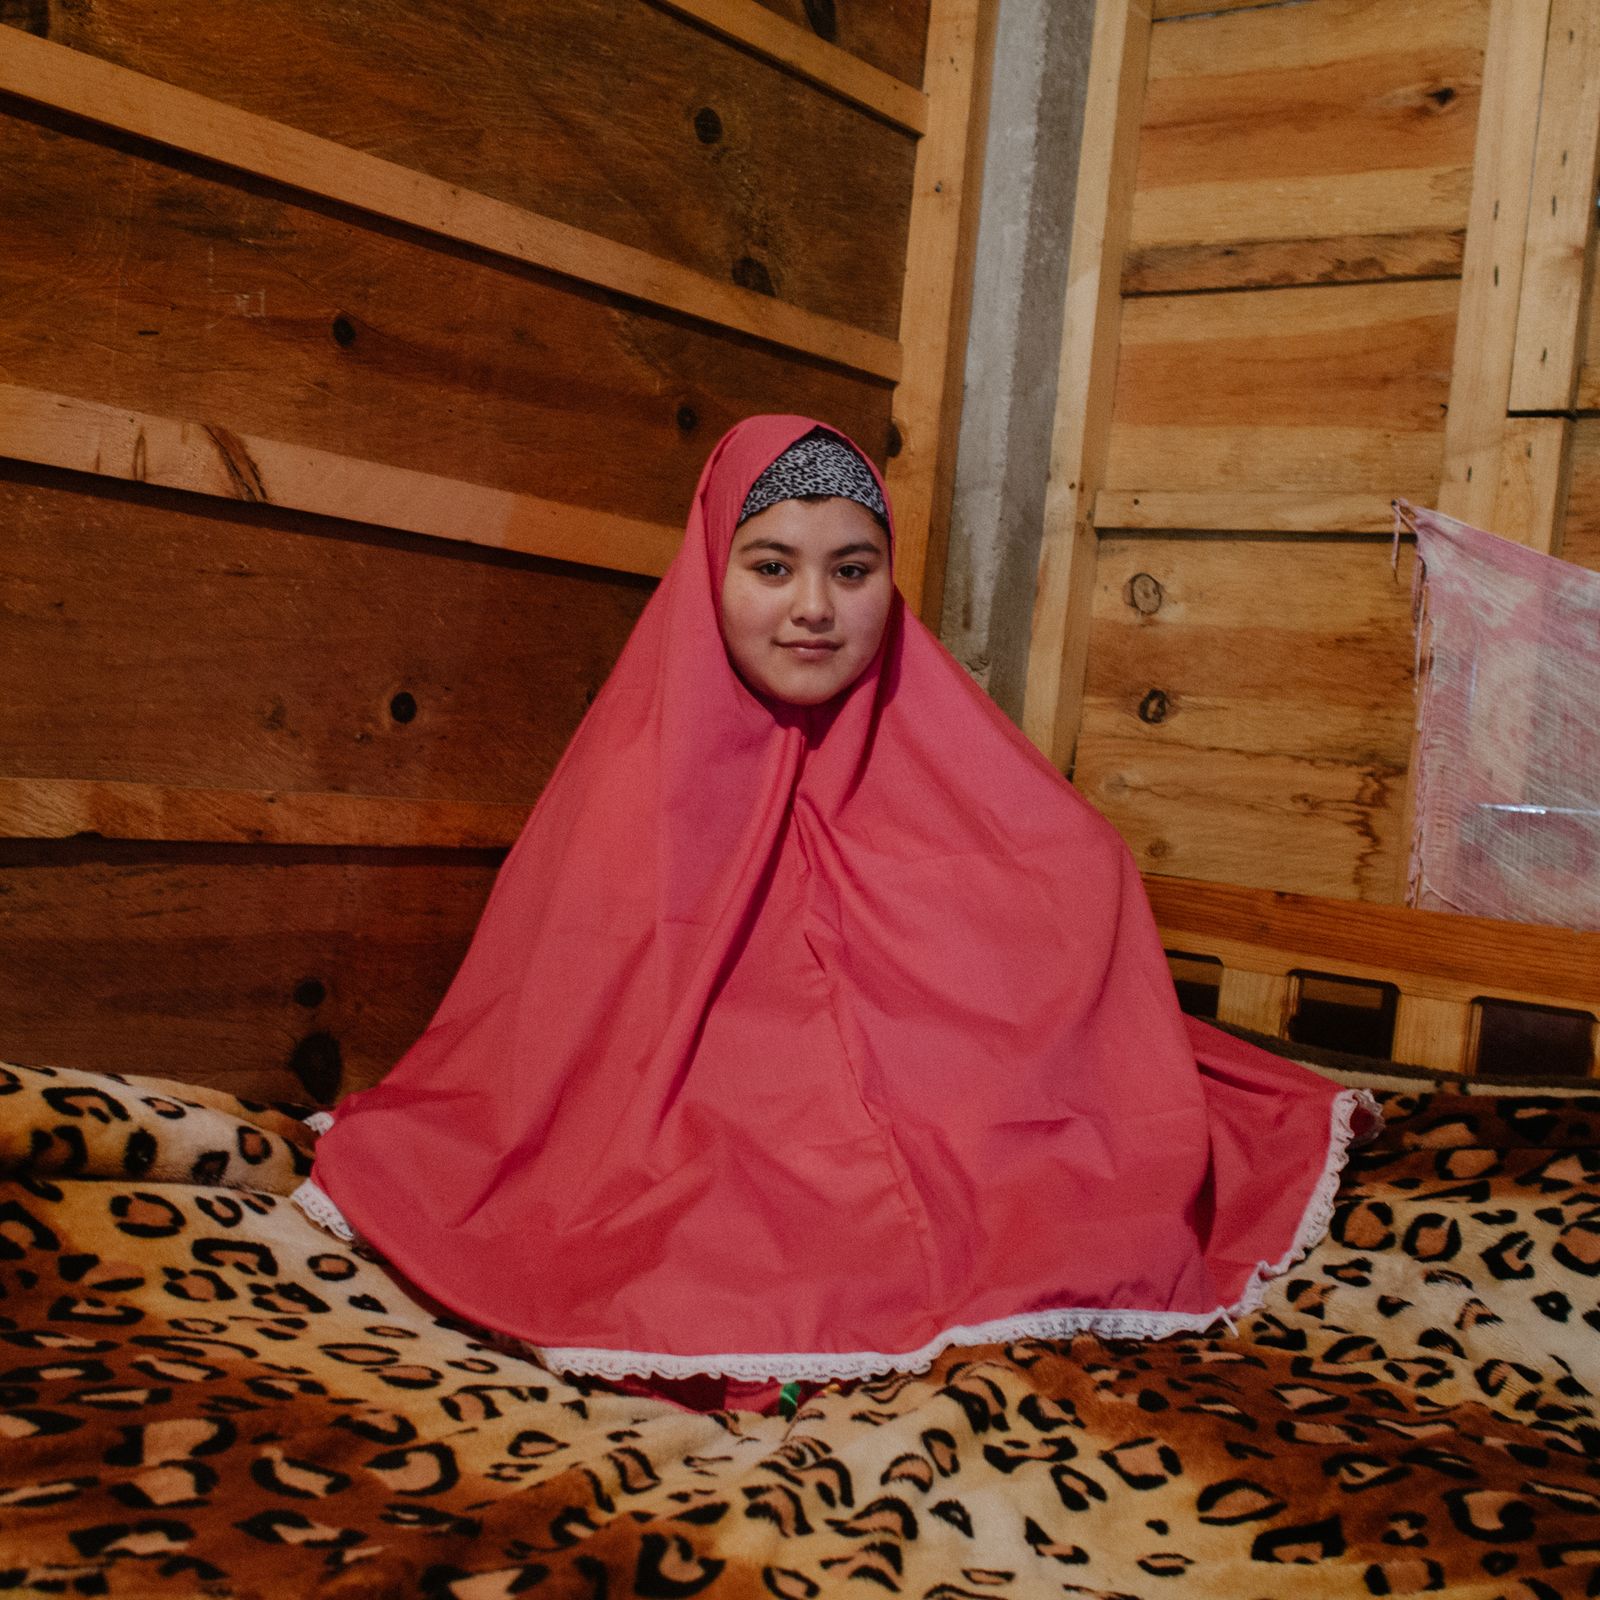 © Giulia Iacolutti - Salama Palamo Diaz in her room with her favorite hijab, a gift from foreign Muslims who have come to know the community.